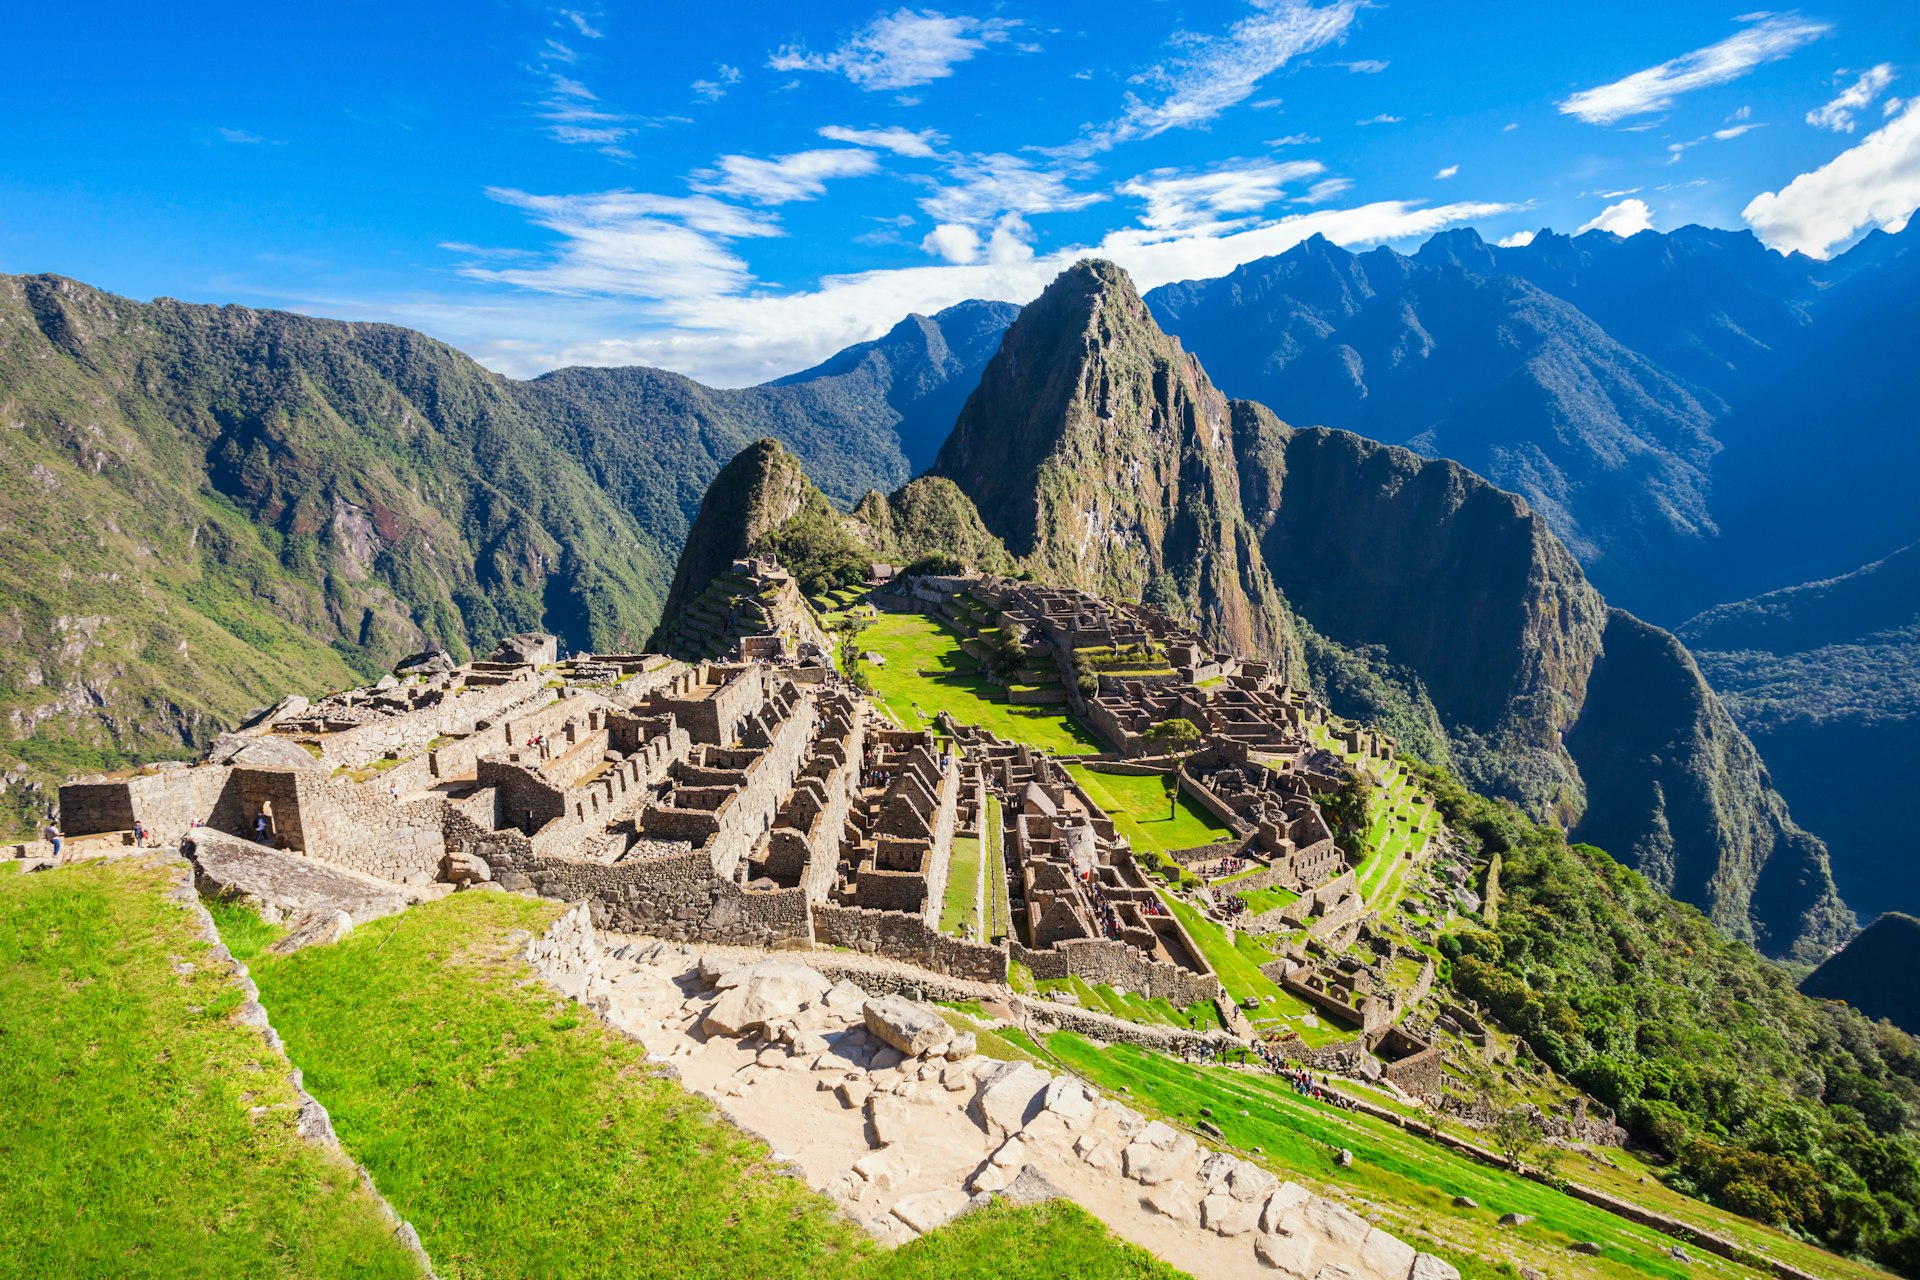 High-angle view of the Lost Incan City of Machu Picchu